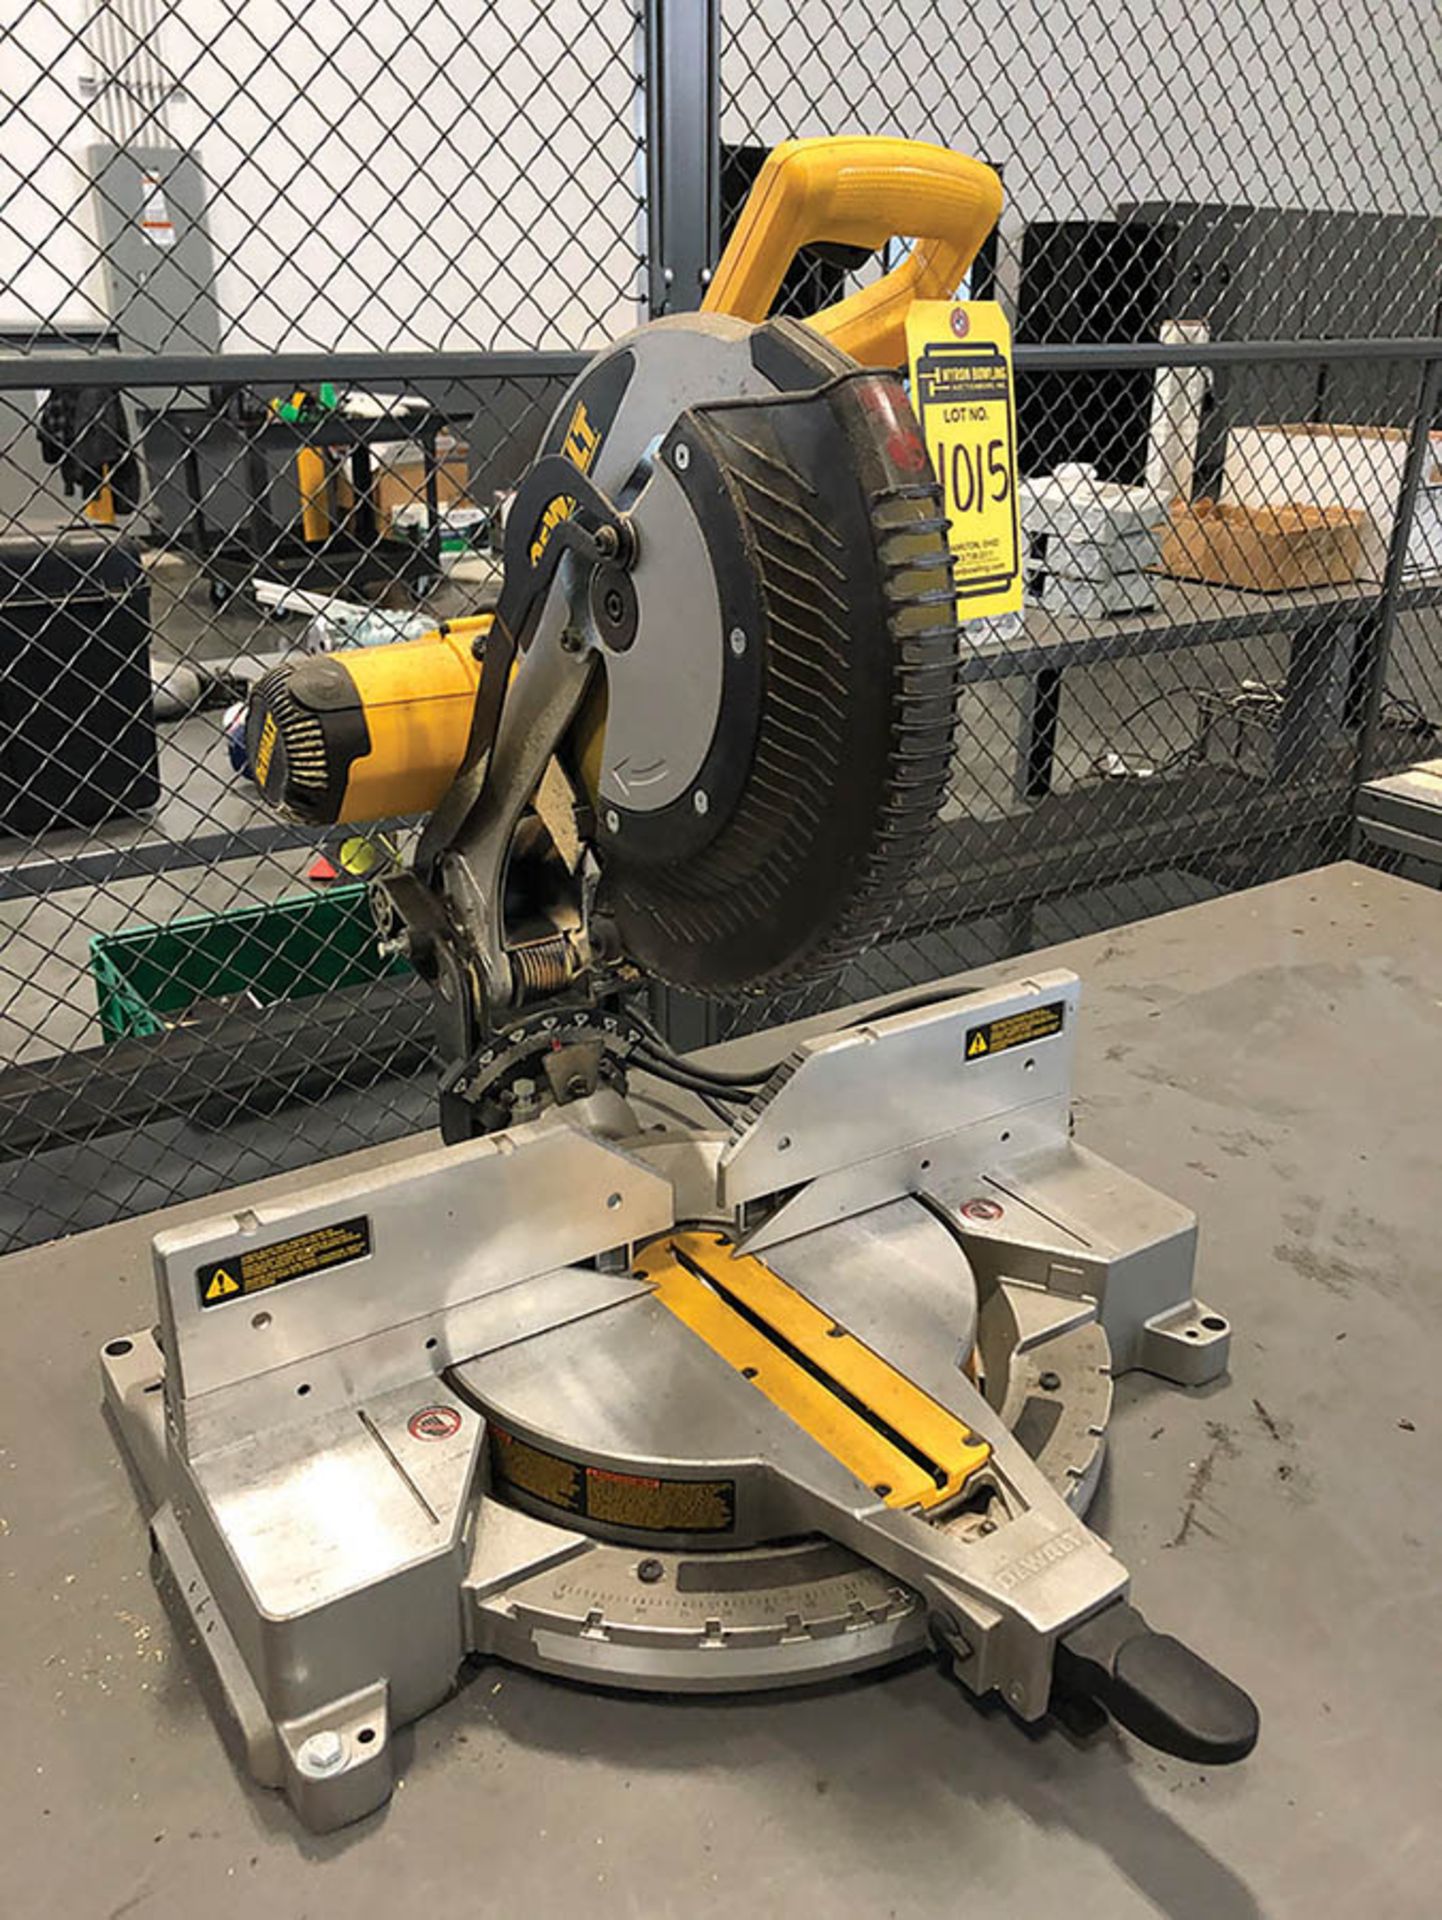 DEWALT 12'' DOUBLE BEVEL COMPOUND MITER SAW, MODEL DW716, S/N 264182, MOUNTED ON STEEL TABLE - Image 4 of 4